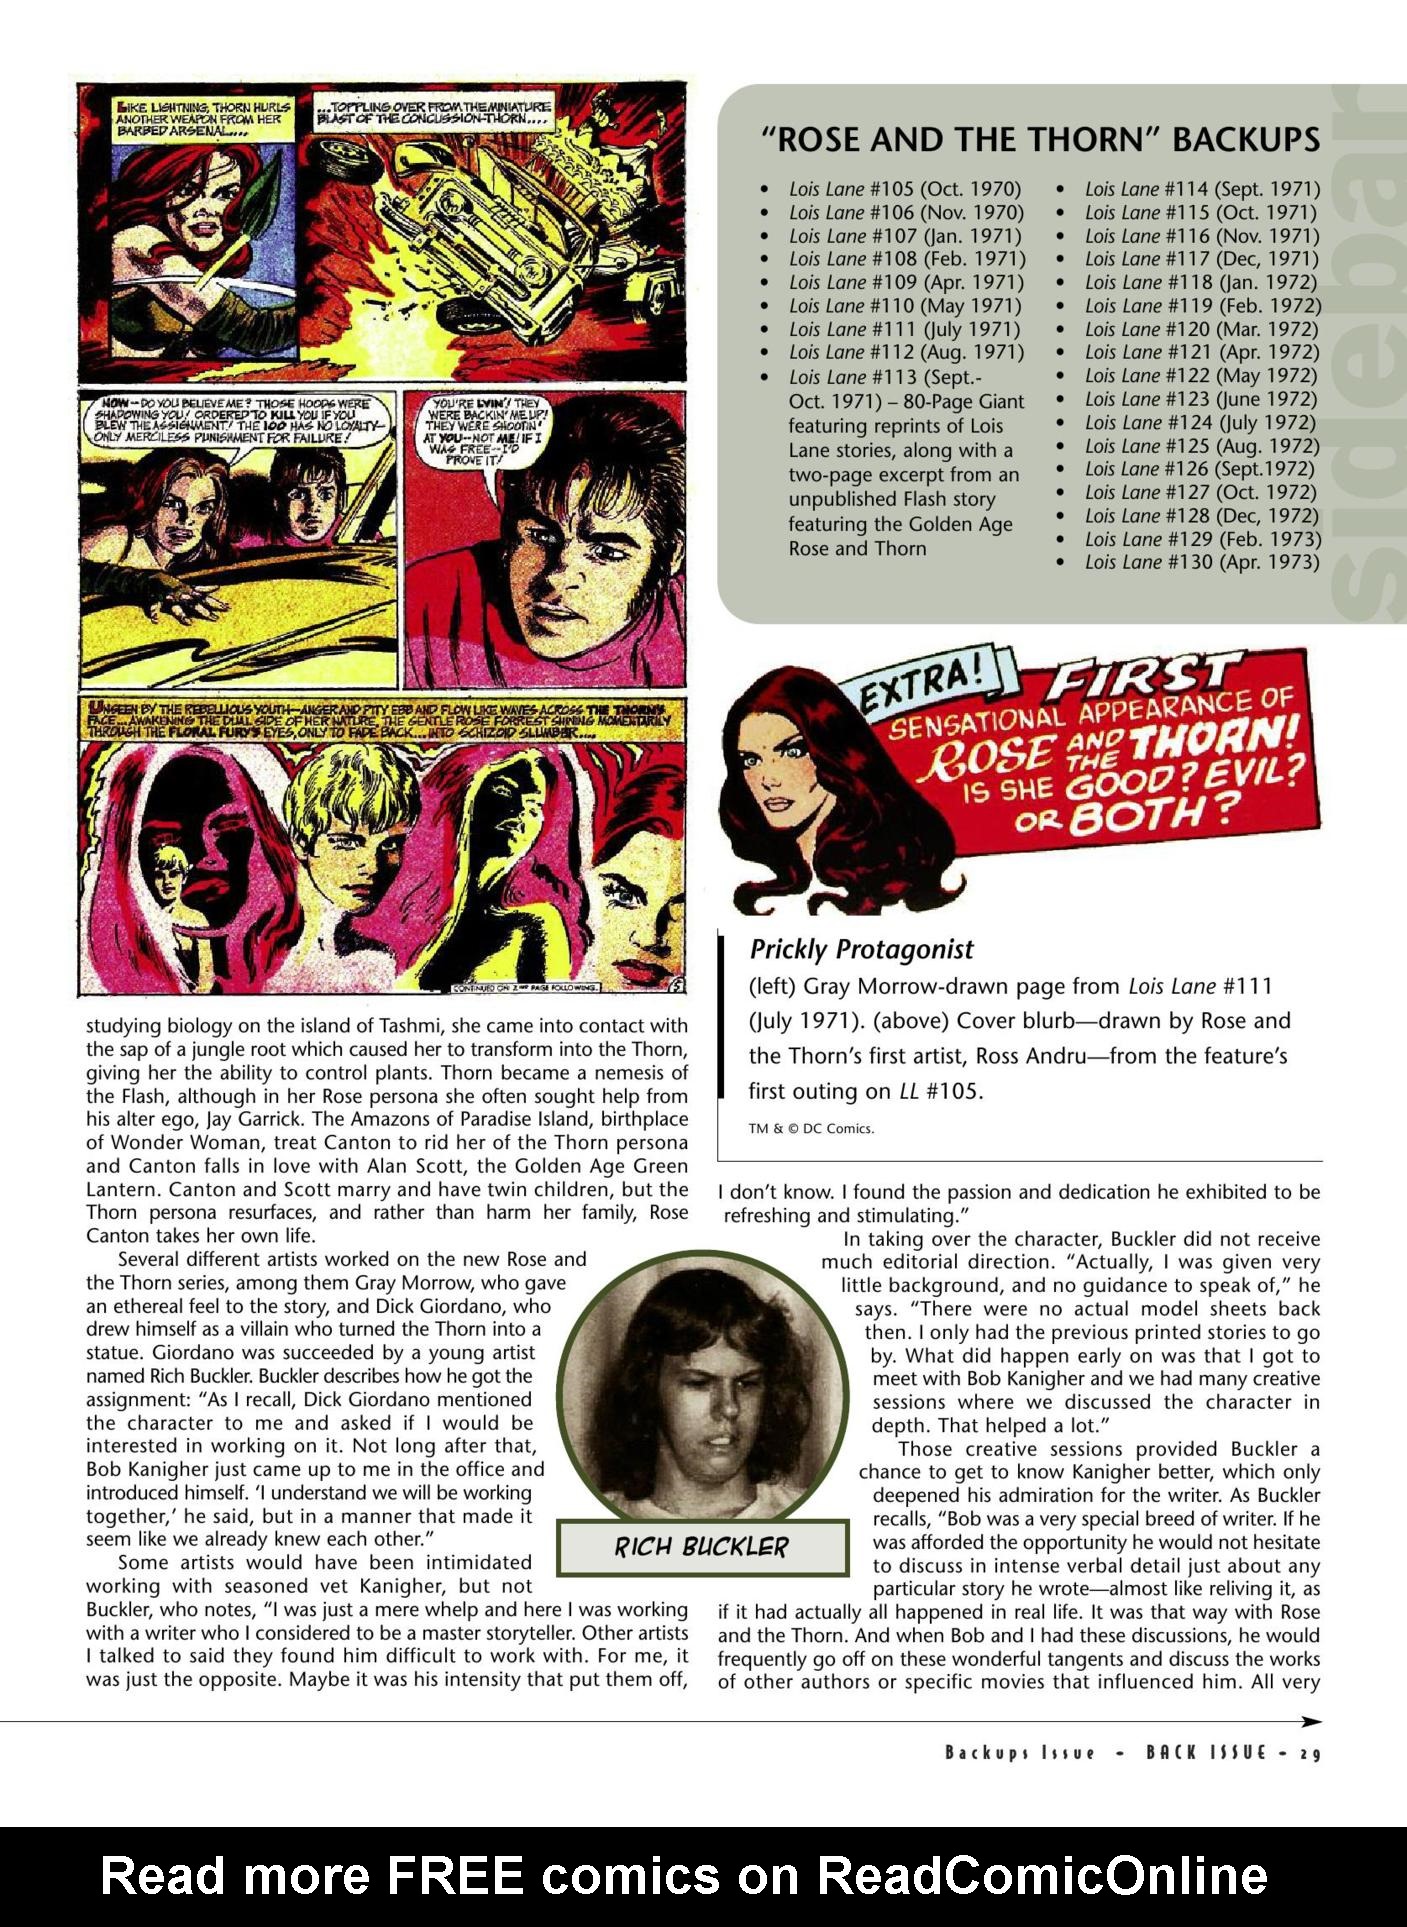 Read online Back Issue comic -  Issue #64 - 31